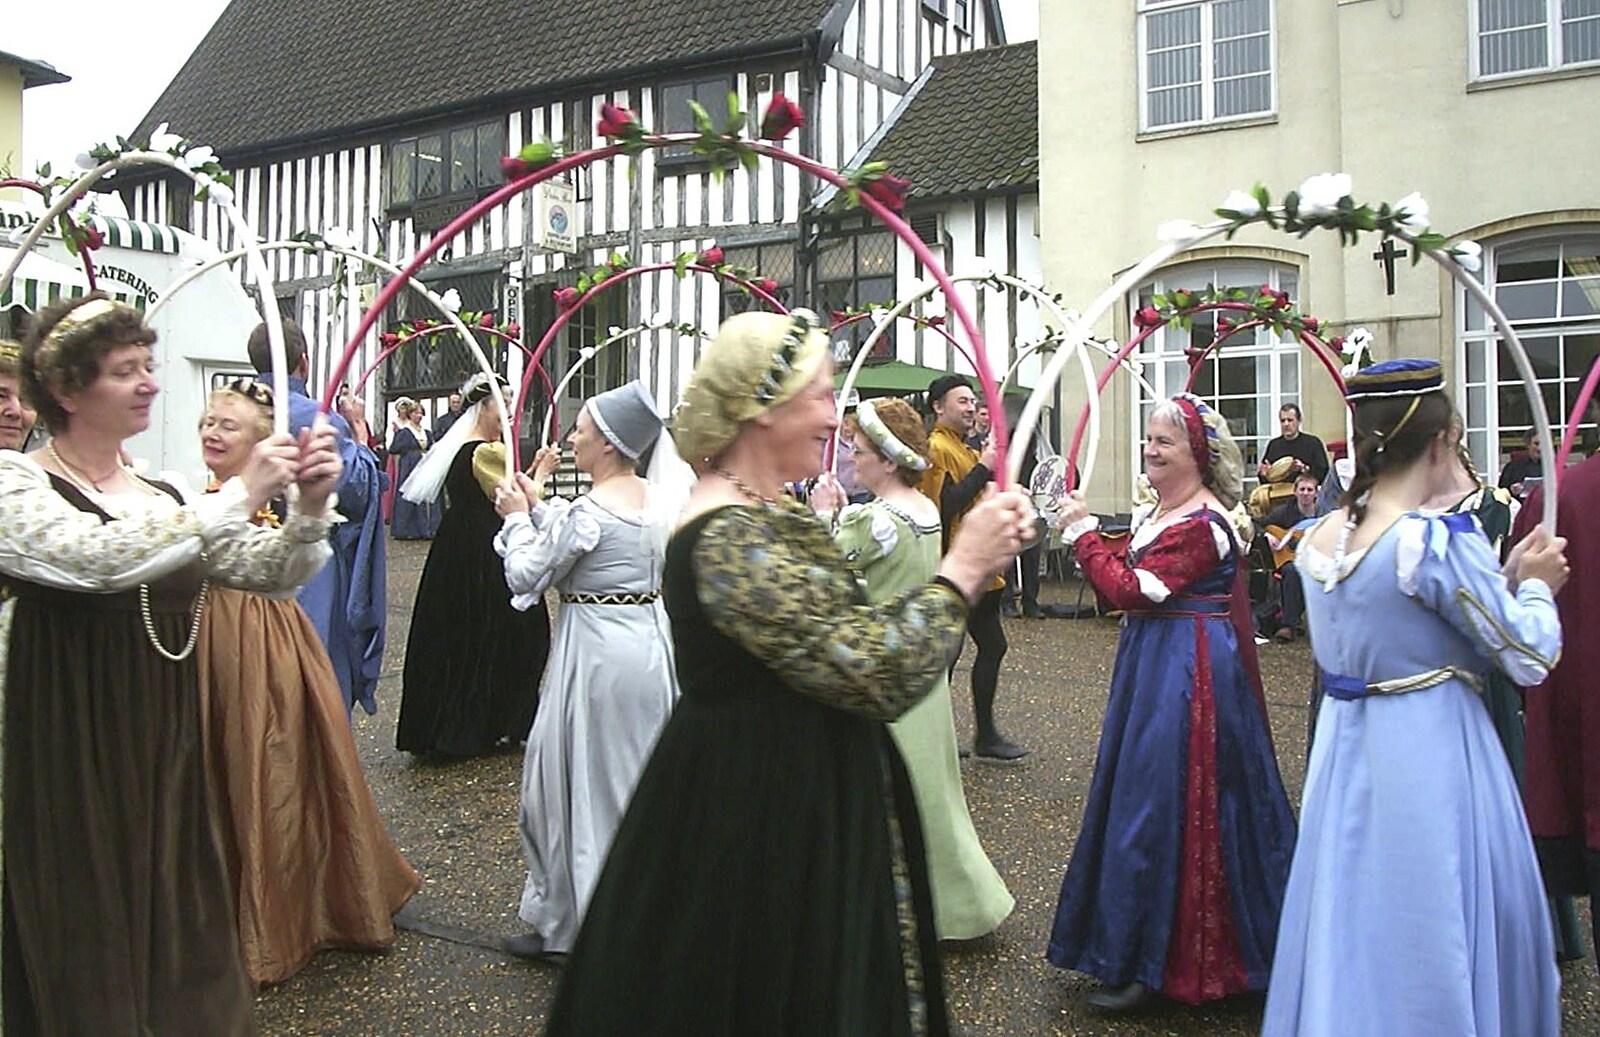 A close-up of the Tudor dancing from Badminton Sprogs and The Skelton Festival, Diss, Norfolk - 1st May 2004